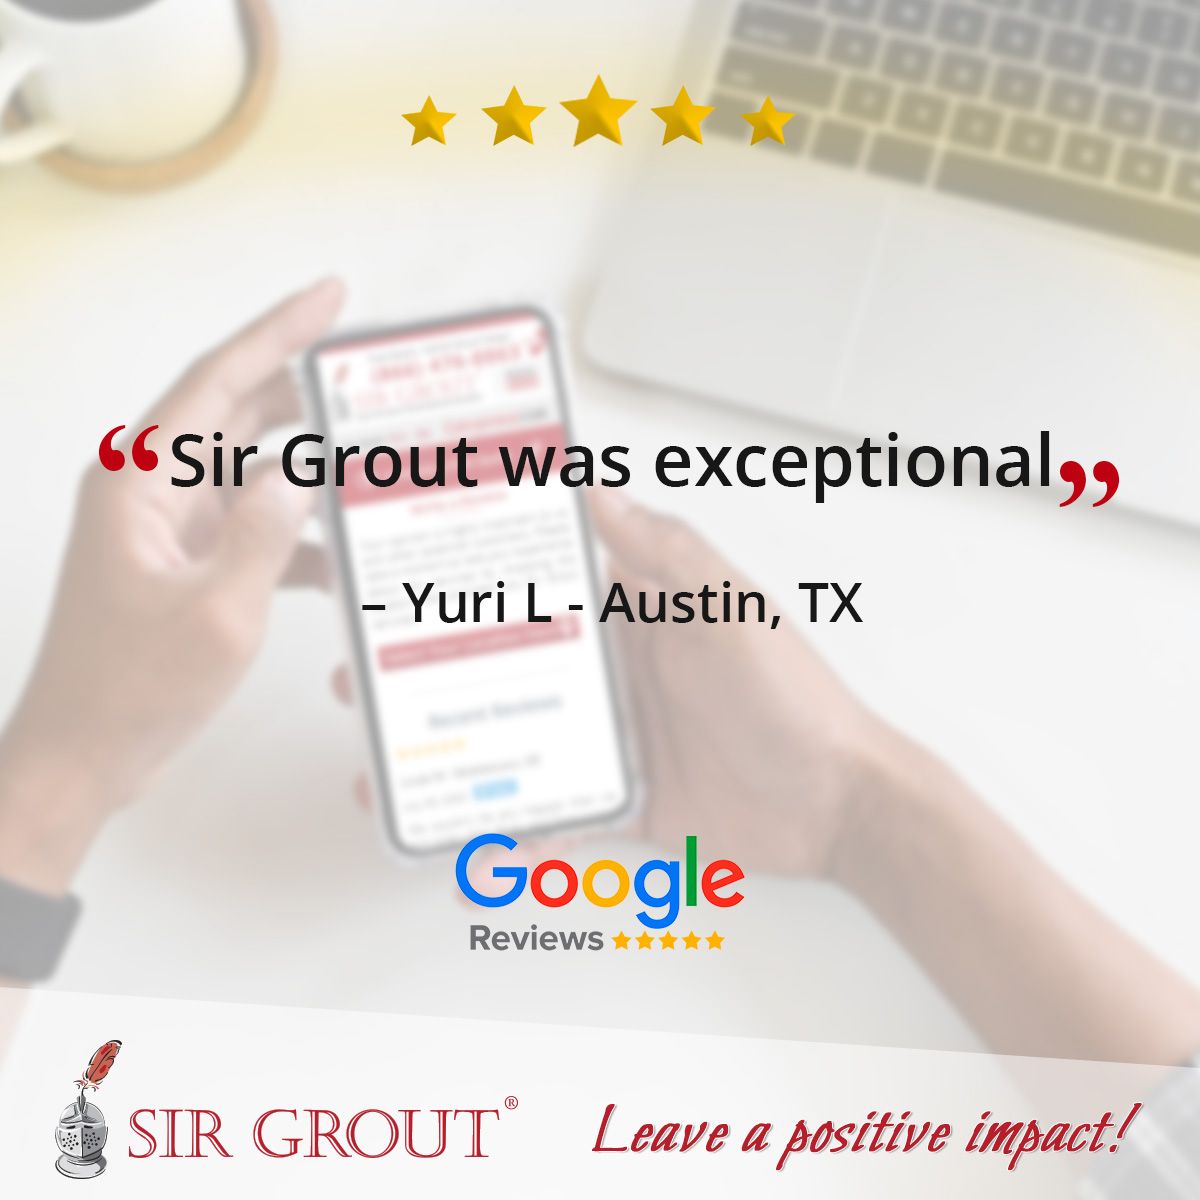 Sir Grout was exceptional